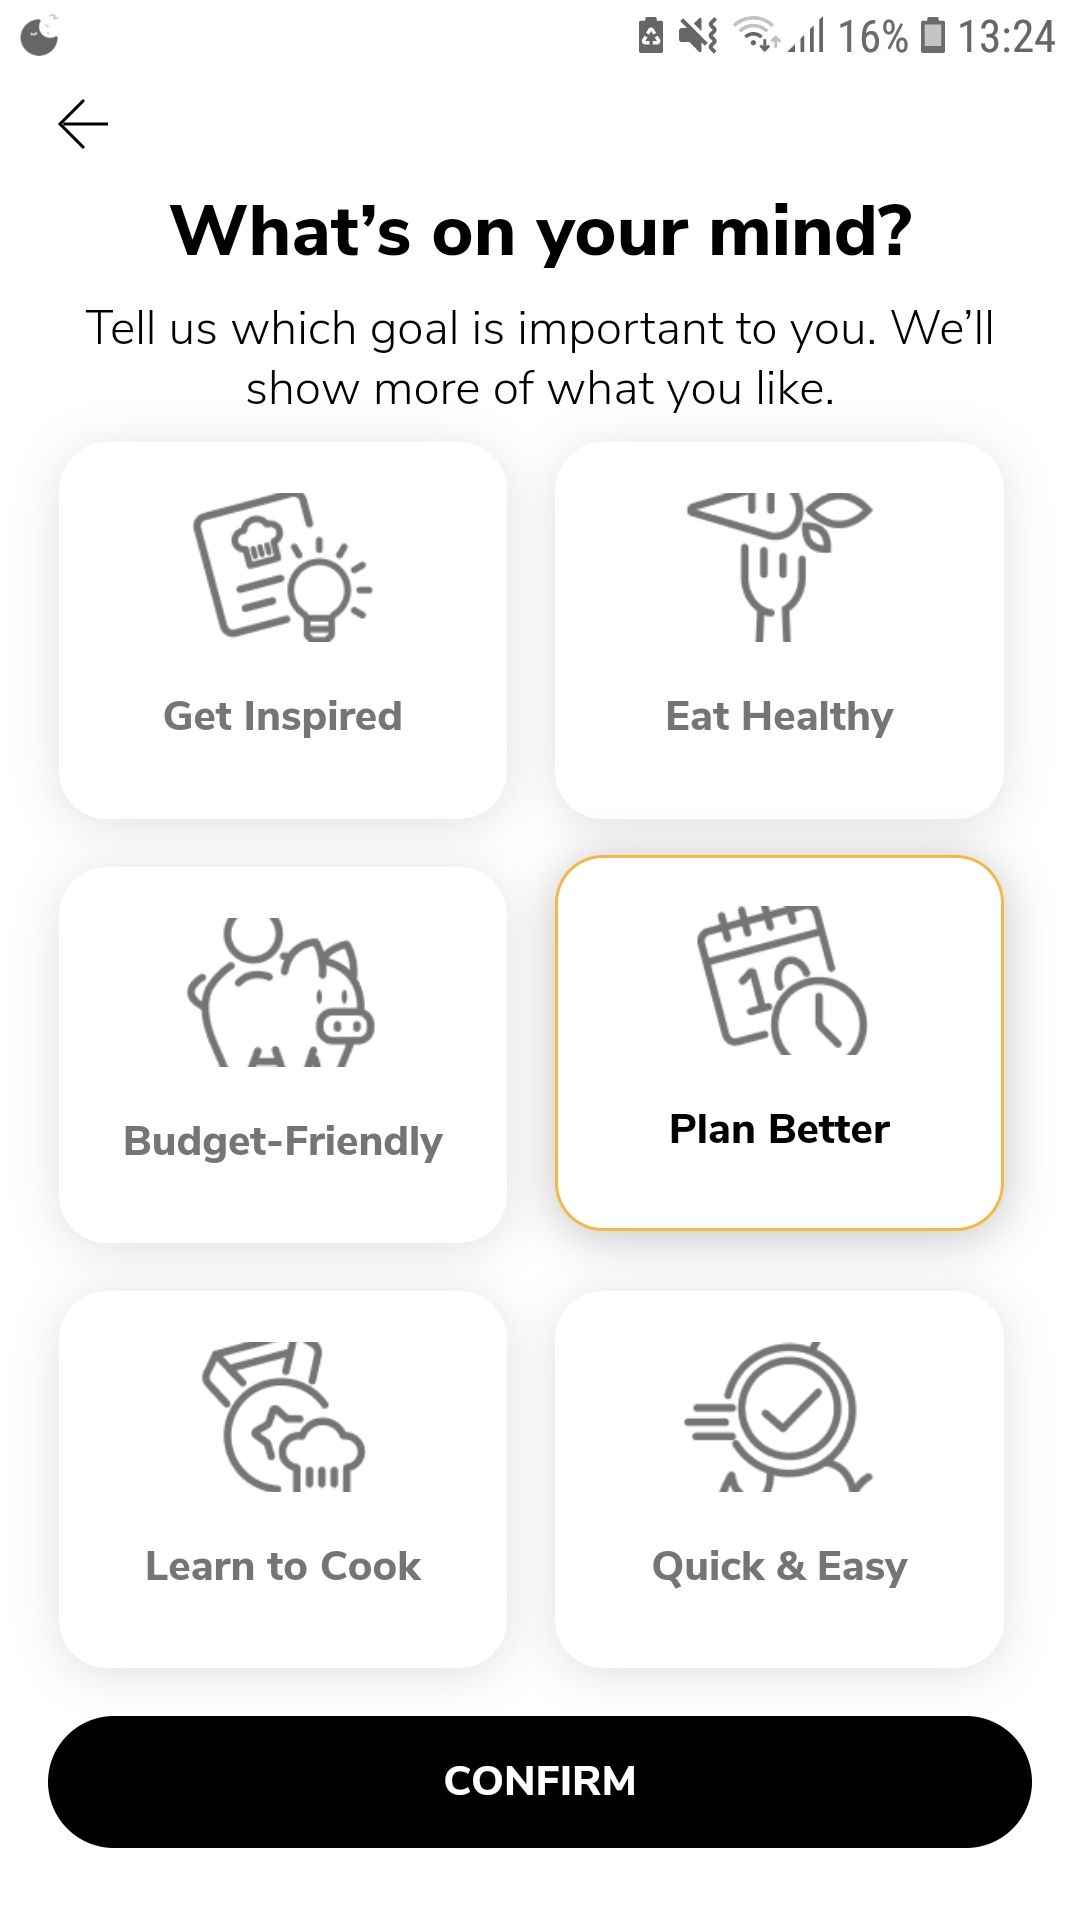 SideChef mobile recipe and meal planning app goal